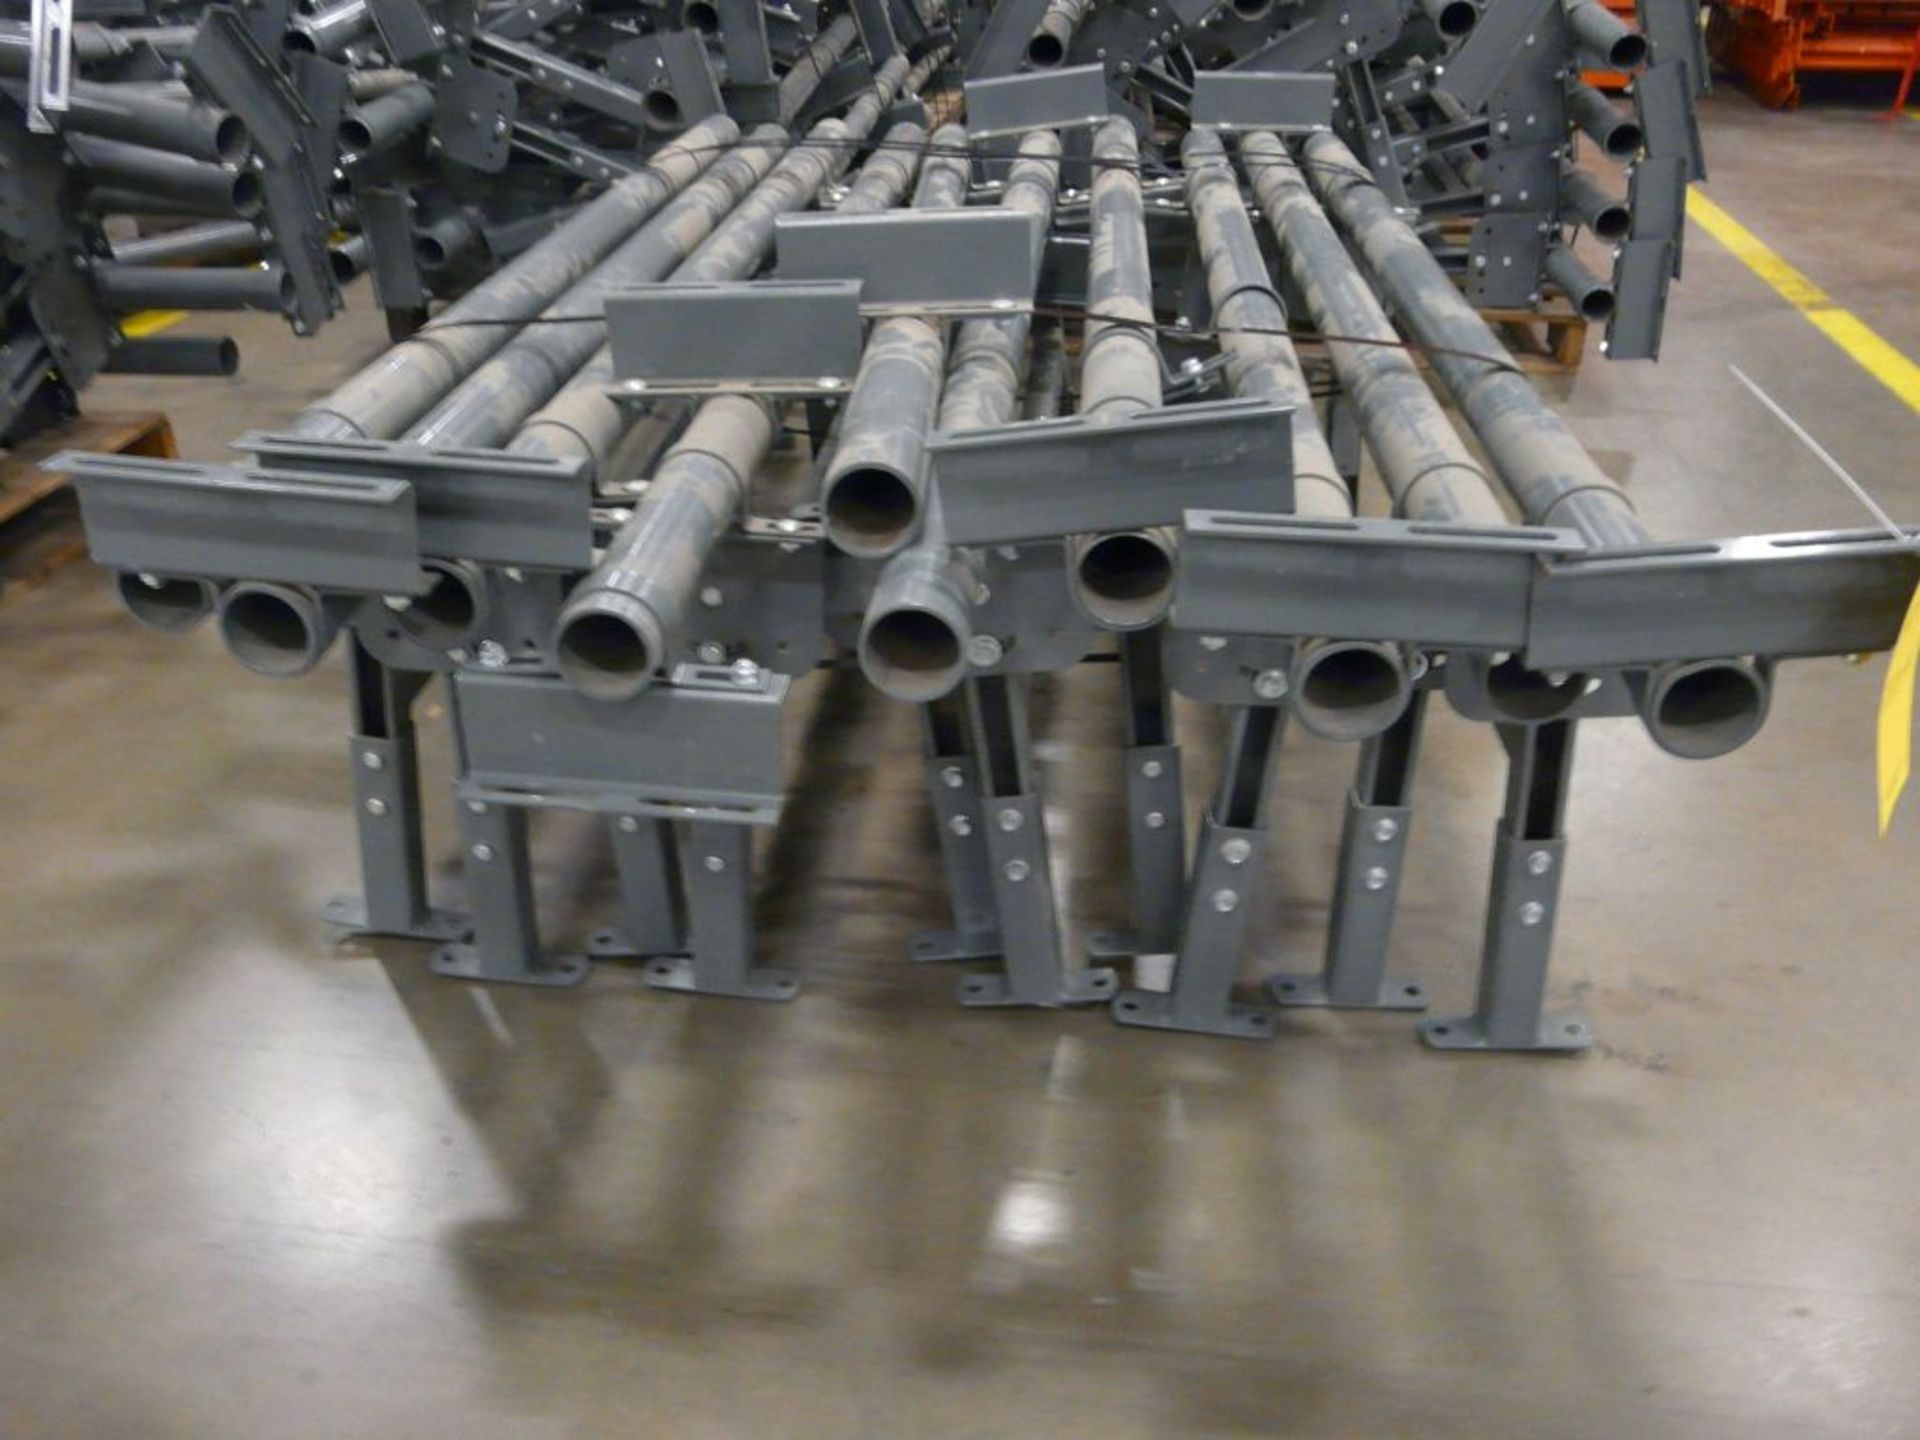 Lot of (10) USA Floor Supports - Brace: 71"L; Stand: 44"L x 19"H; Tag: 223862 - $30 Lot Loading Fee - Image 3 of 4